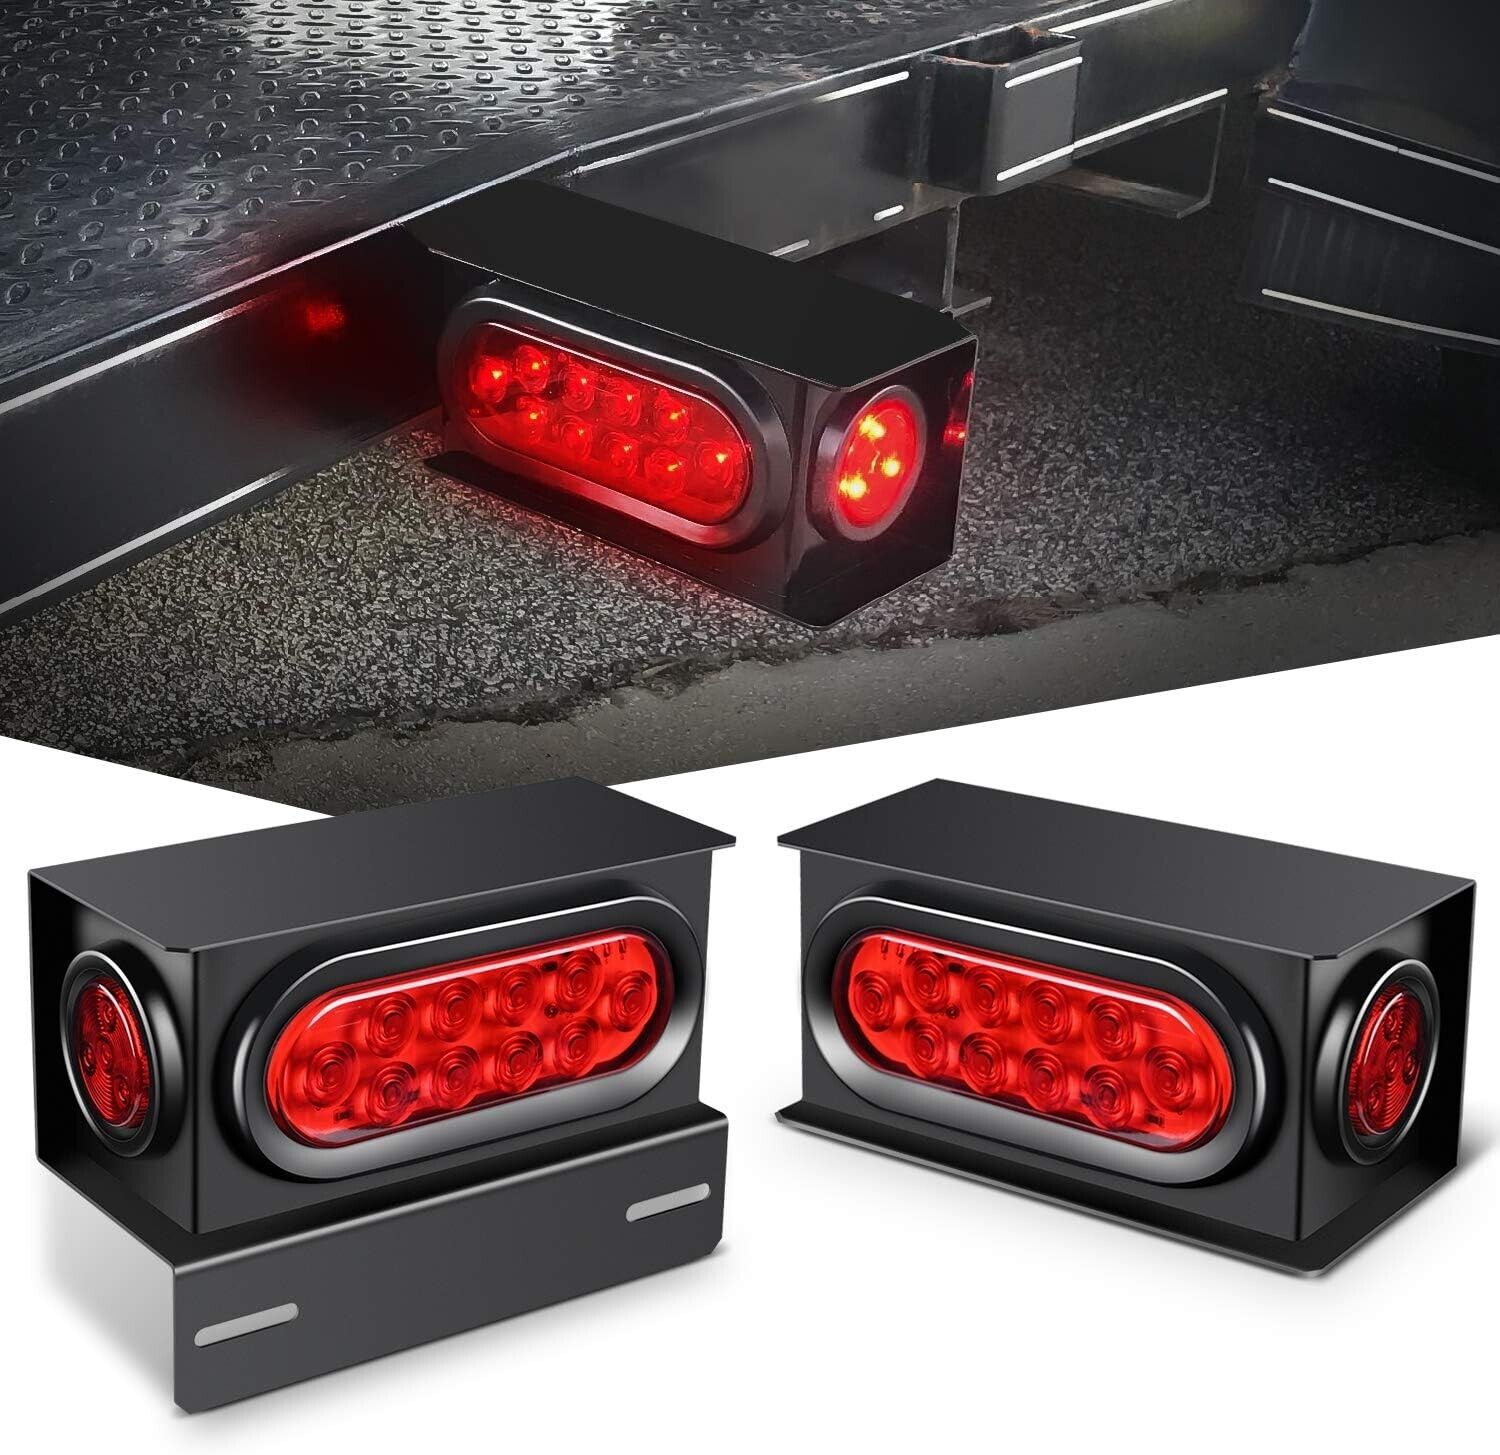 Nilight - TL-34 2PCS Steel Trailer Light Boxes Housing Kit w/6Inch Oval Red LED